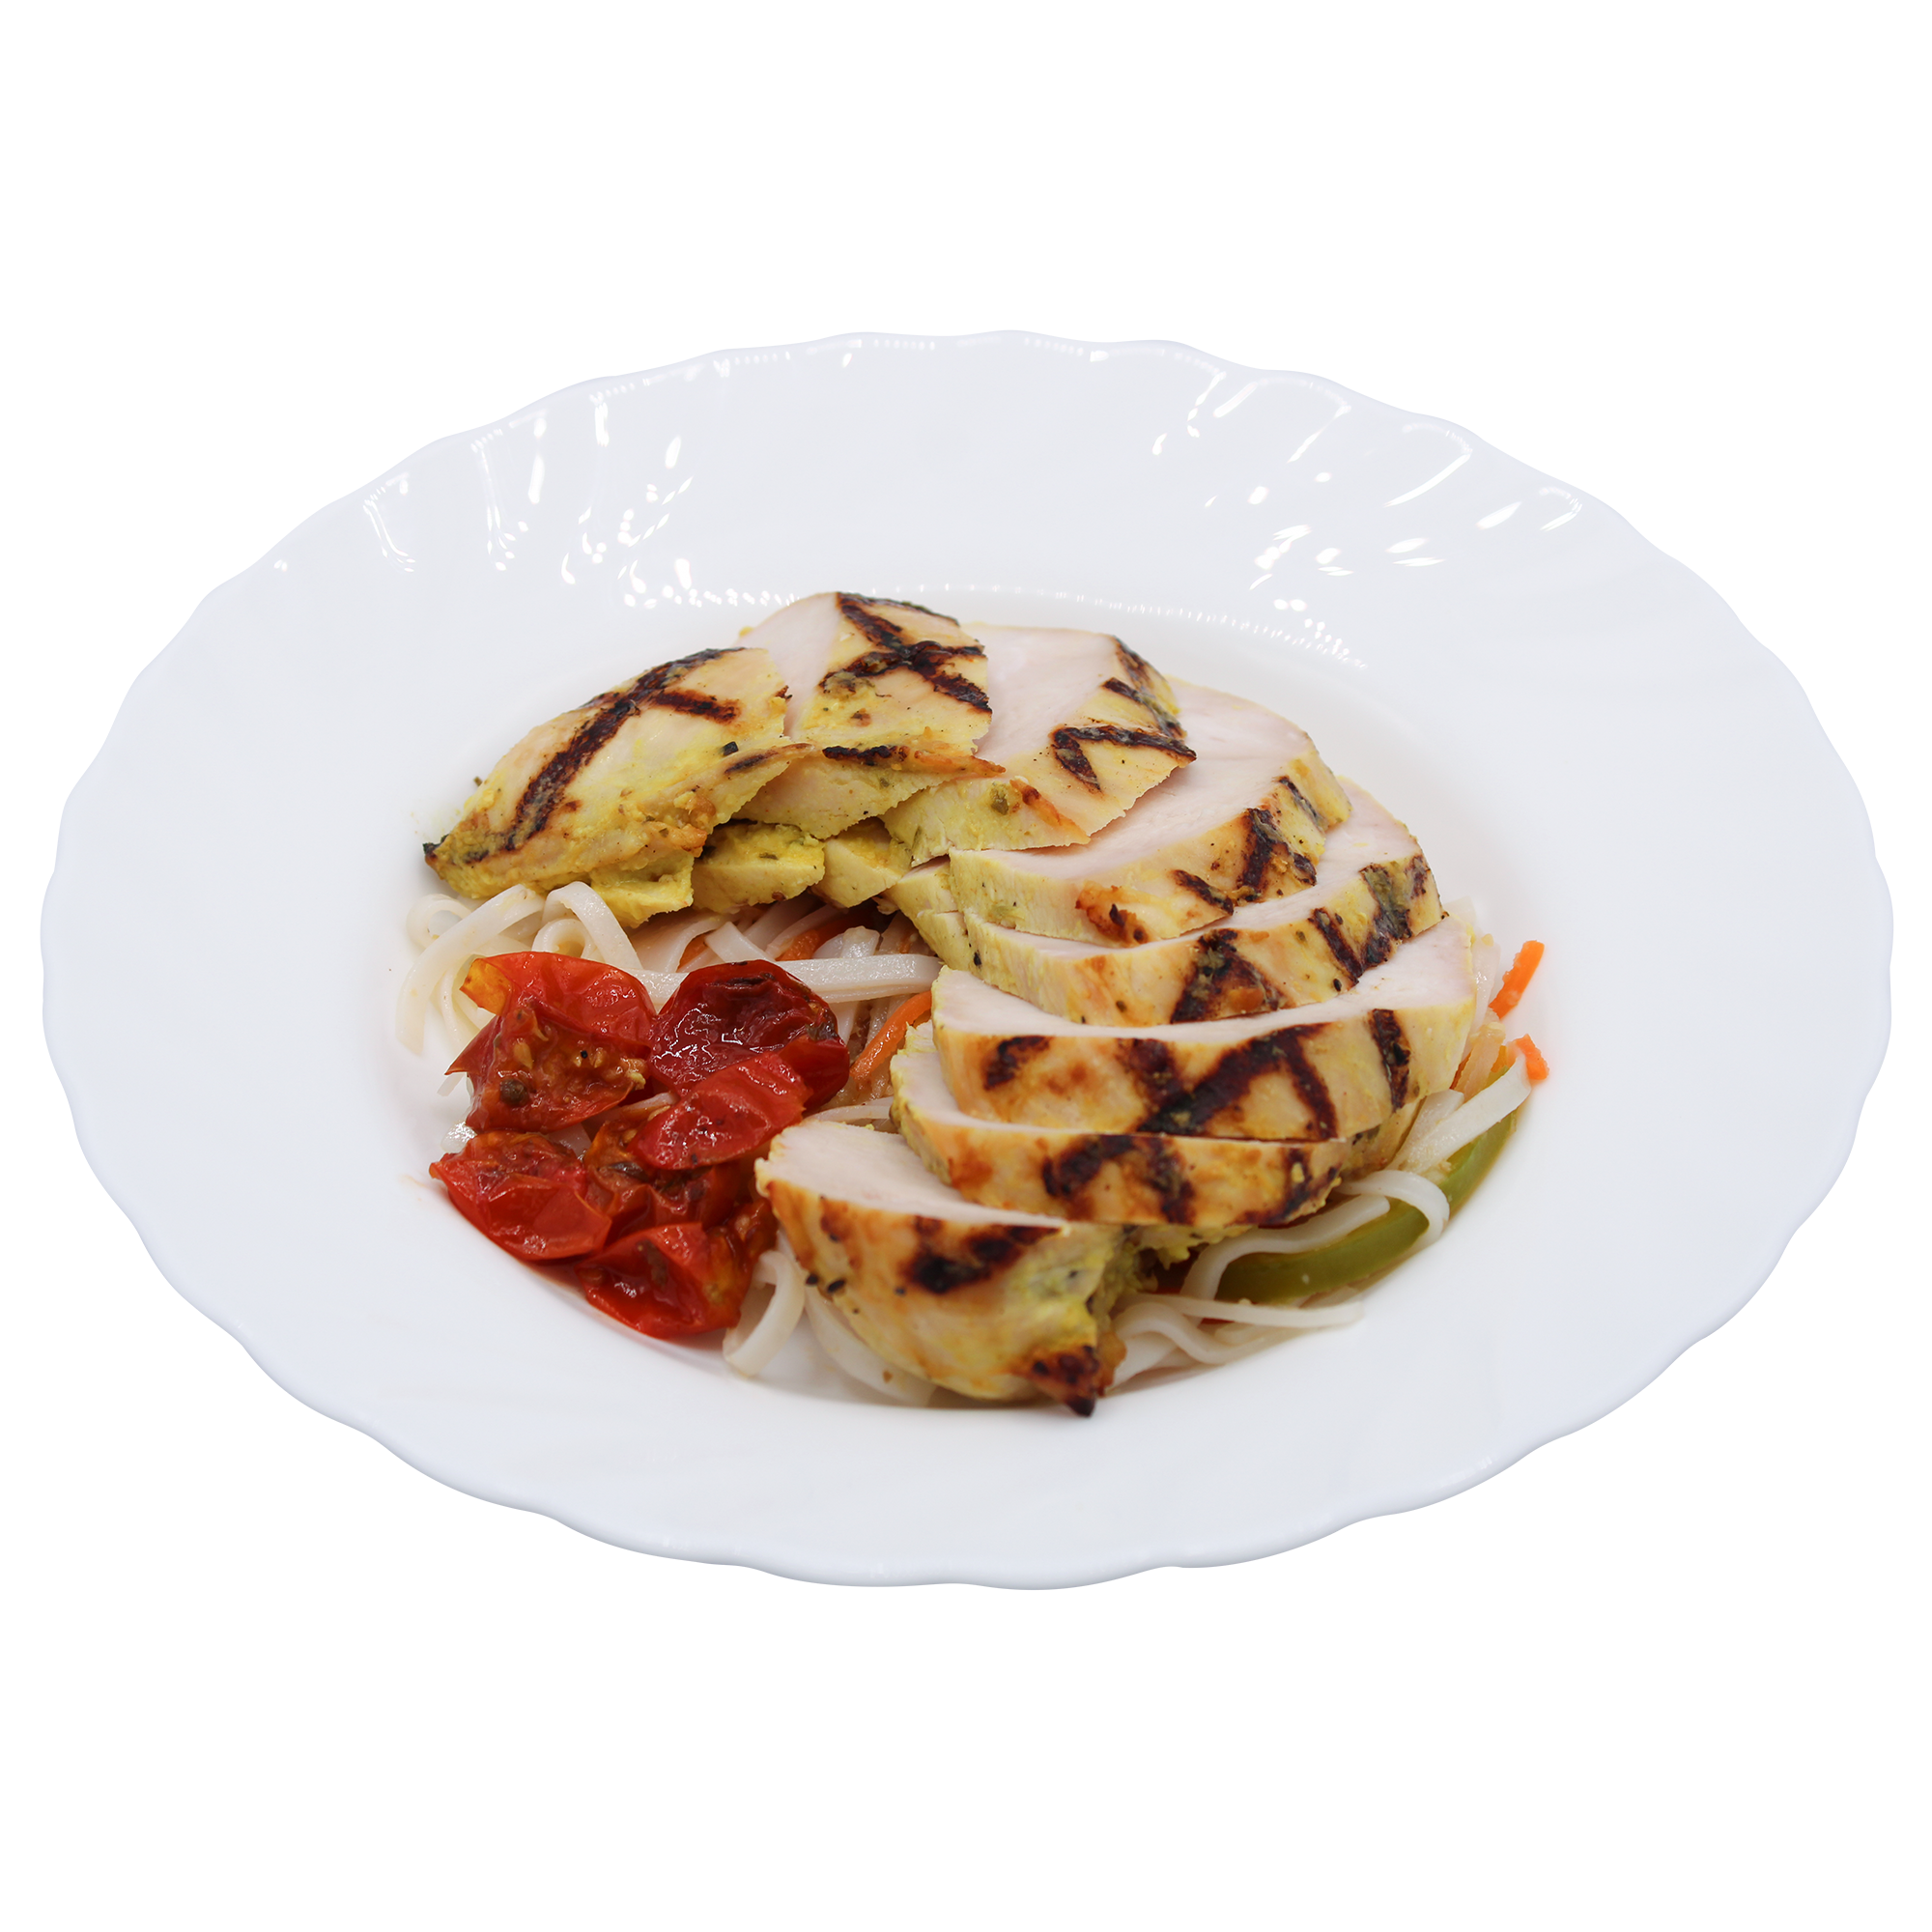 Grilled Chicken Breast On A Bed Of Marinated Rice Noodles (Disposable)